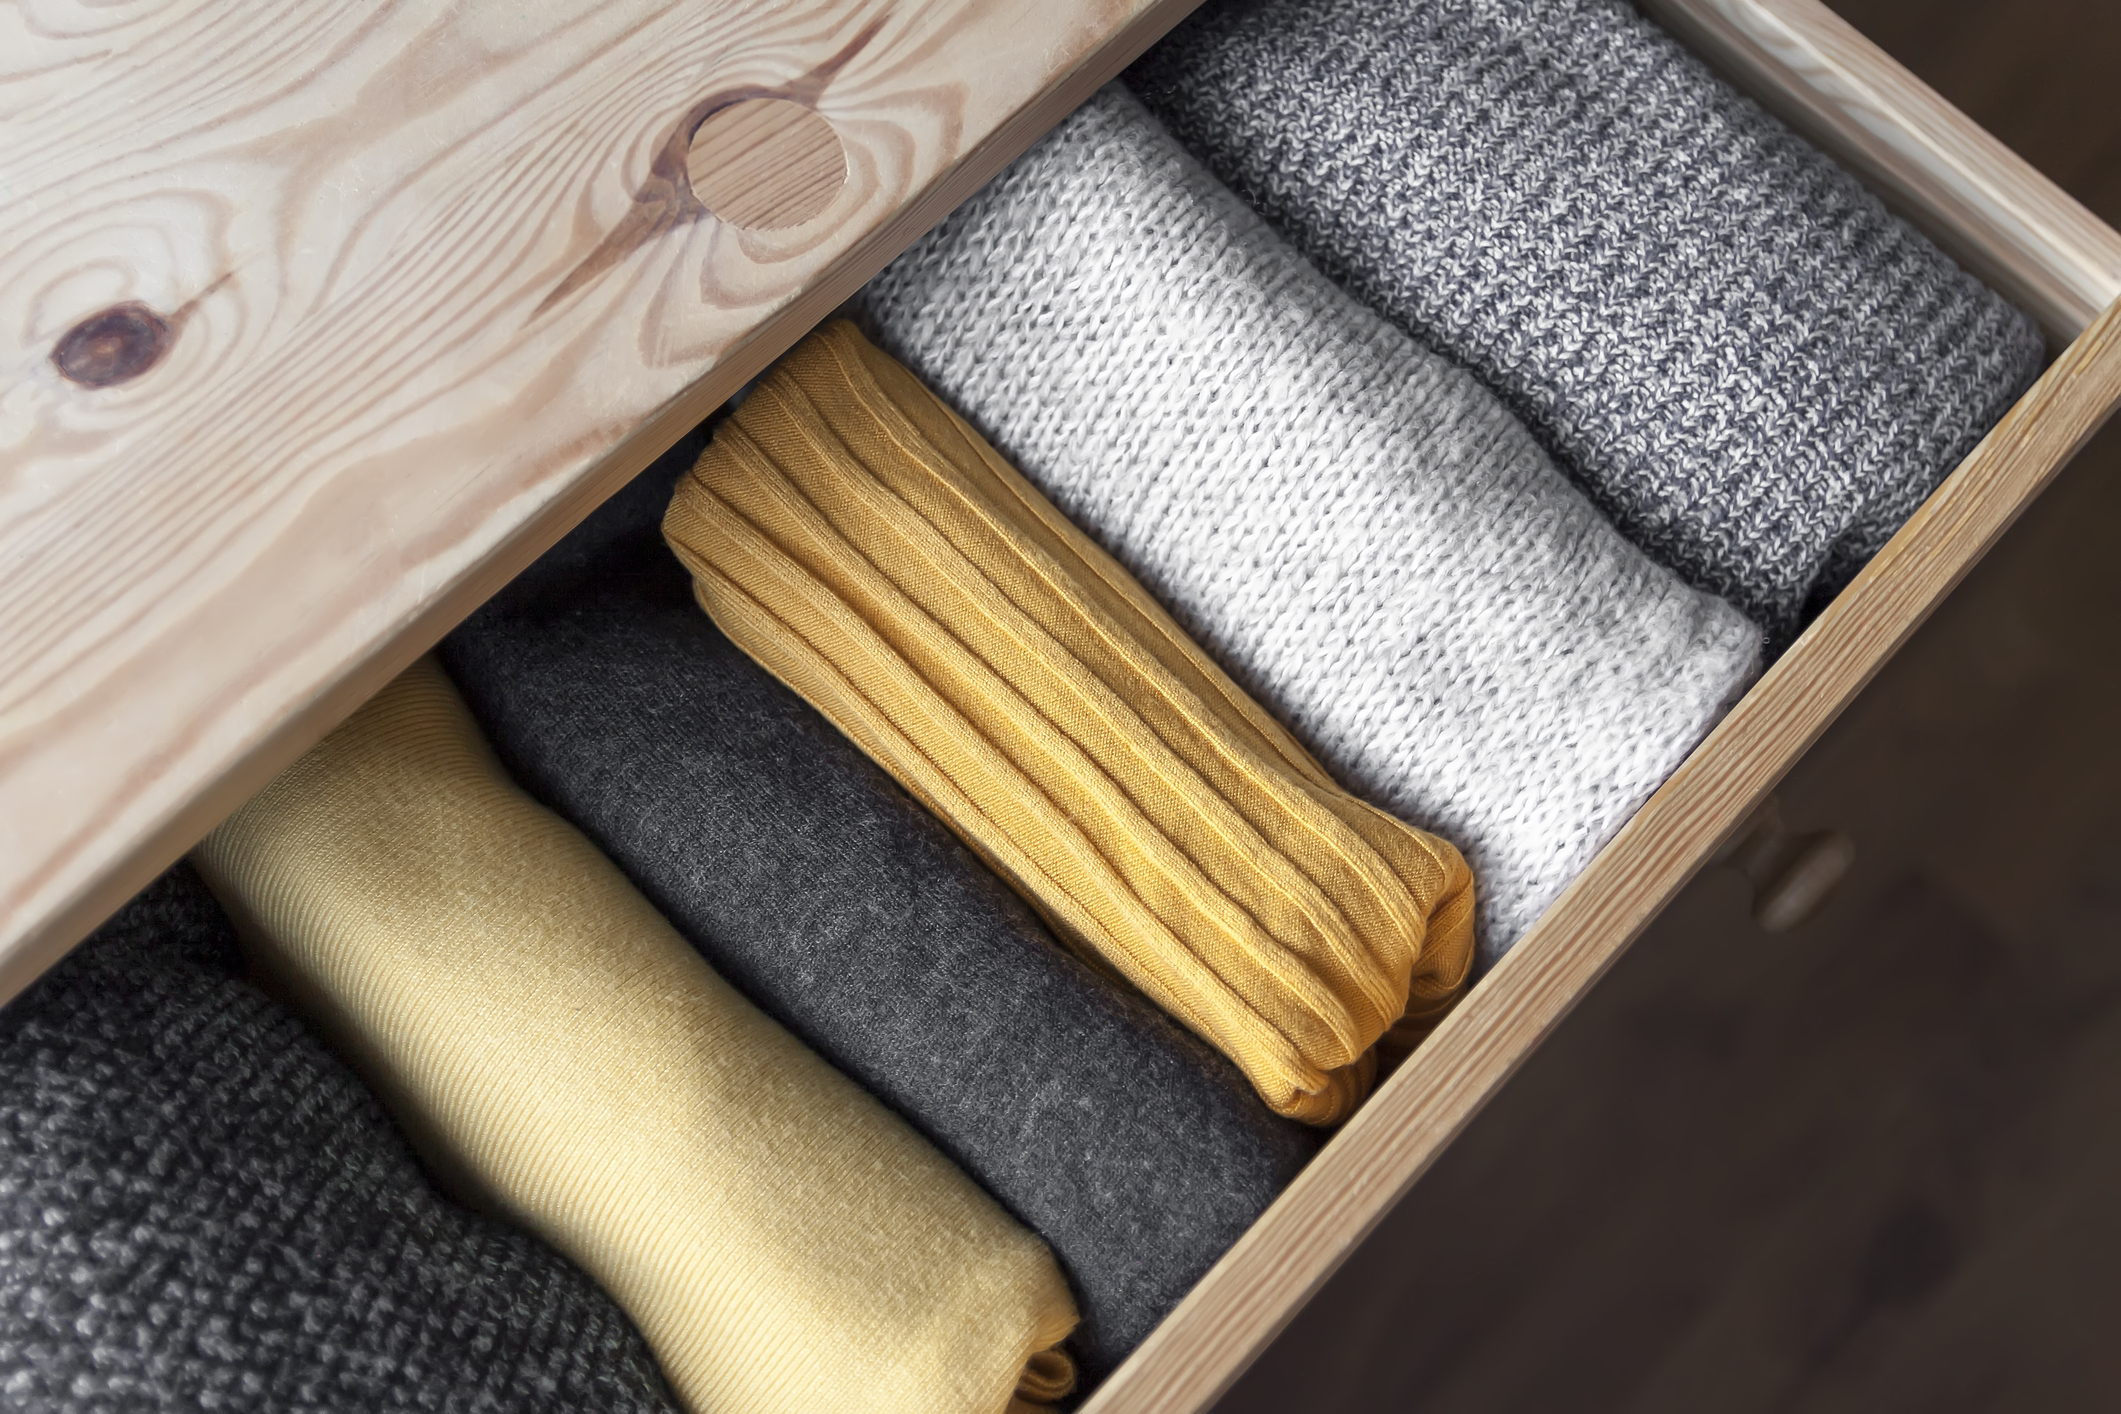 Open wooden dresser drawer with warm knitted sweaters stored inside